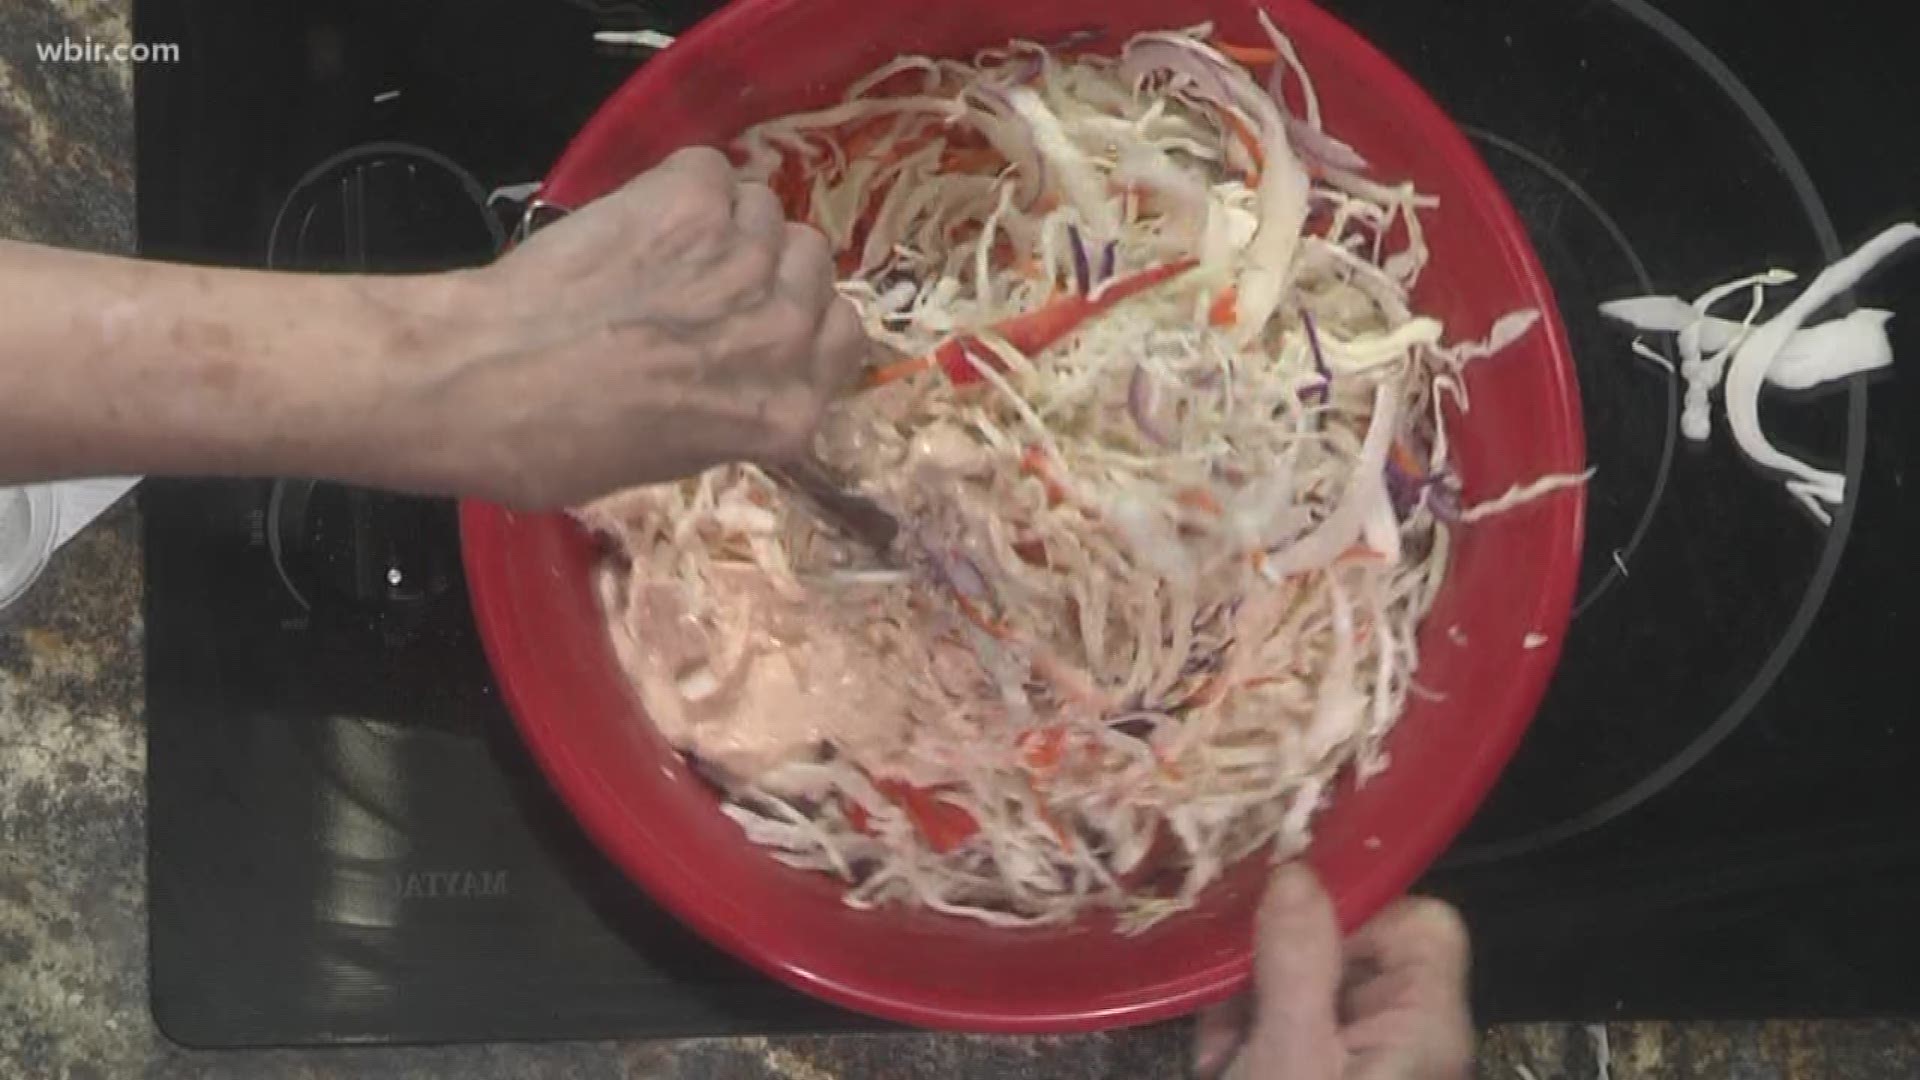 Miss Olivia shares a Southwestern Slaw recipe that will spice up your picnic. Miss Olivia's Table is located at 1108 W. Broadway Avenue in Maryville. July 17, 2019-4pm.